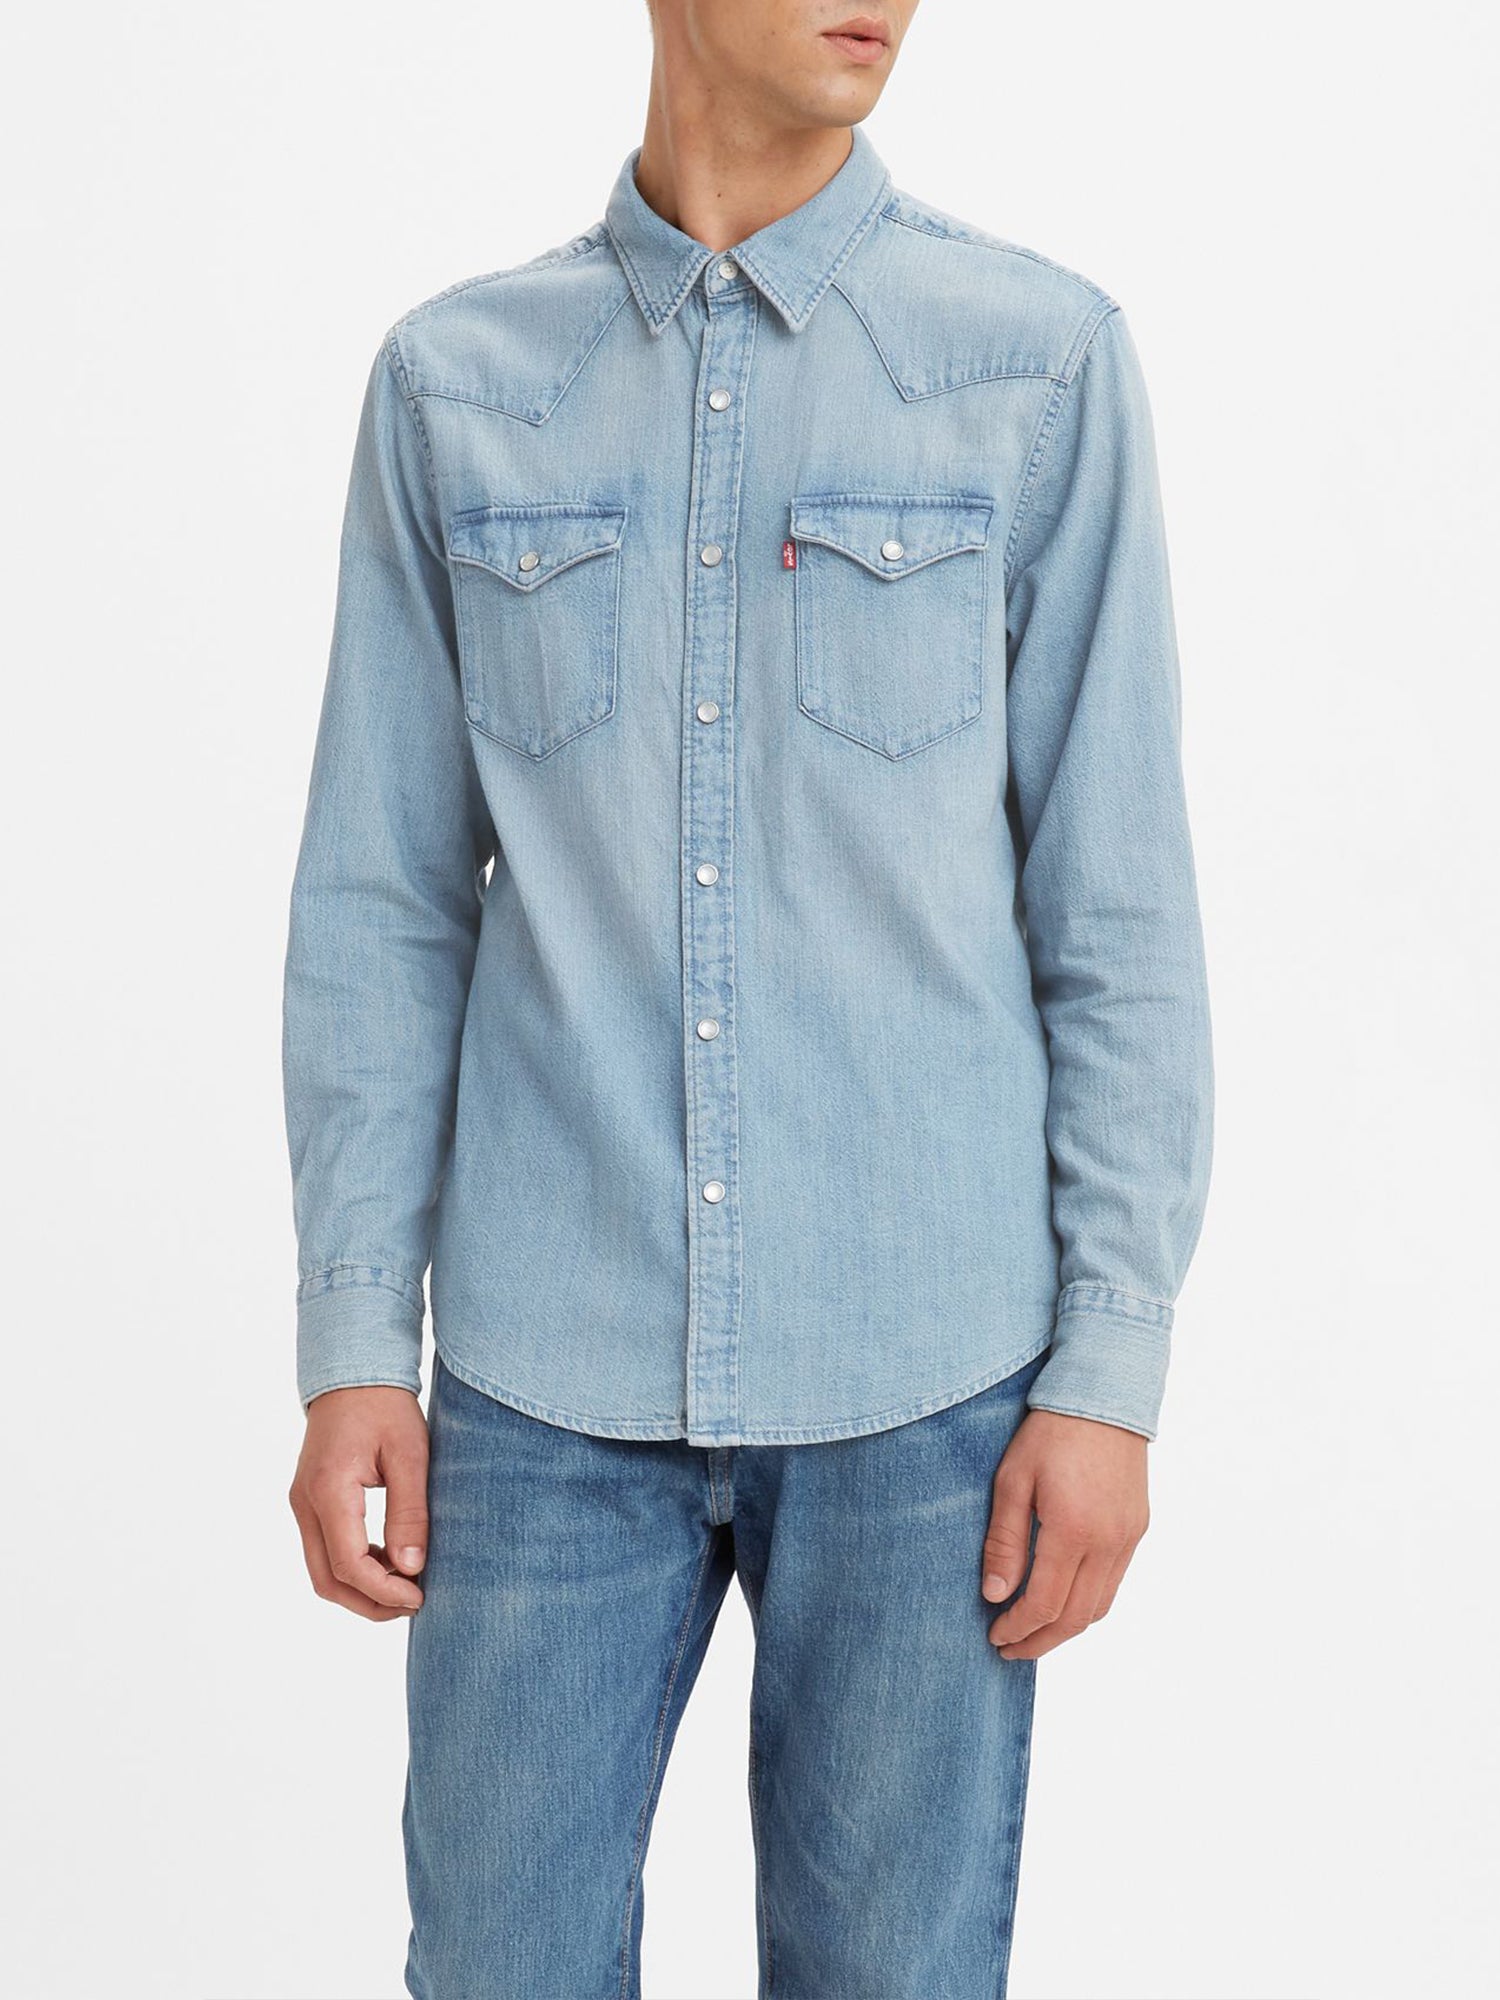 BARSTOW WESTERN STANDARD FIT SHIRT